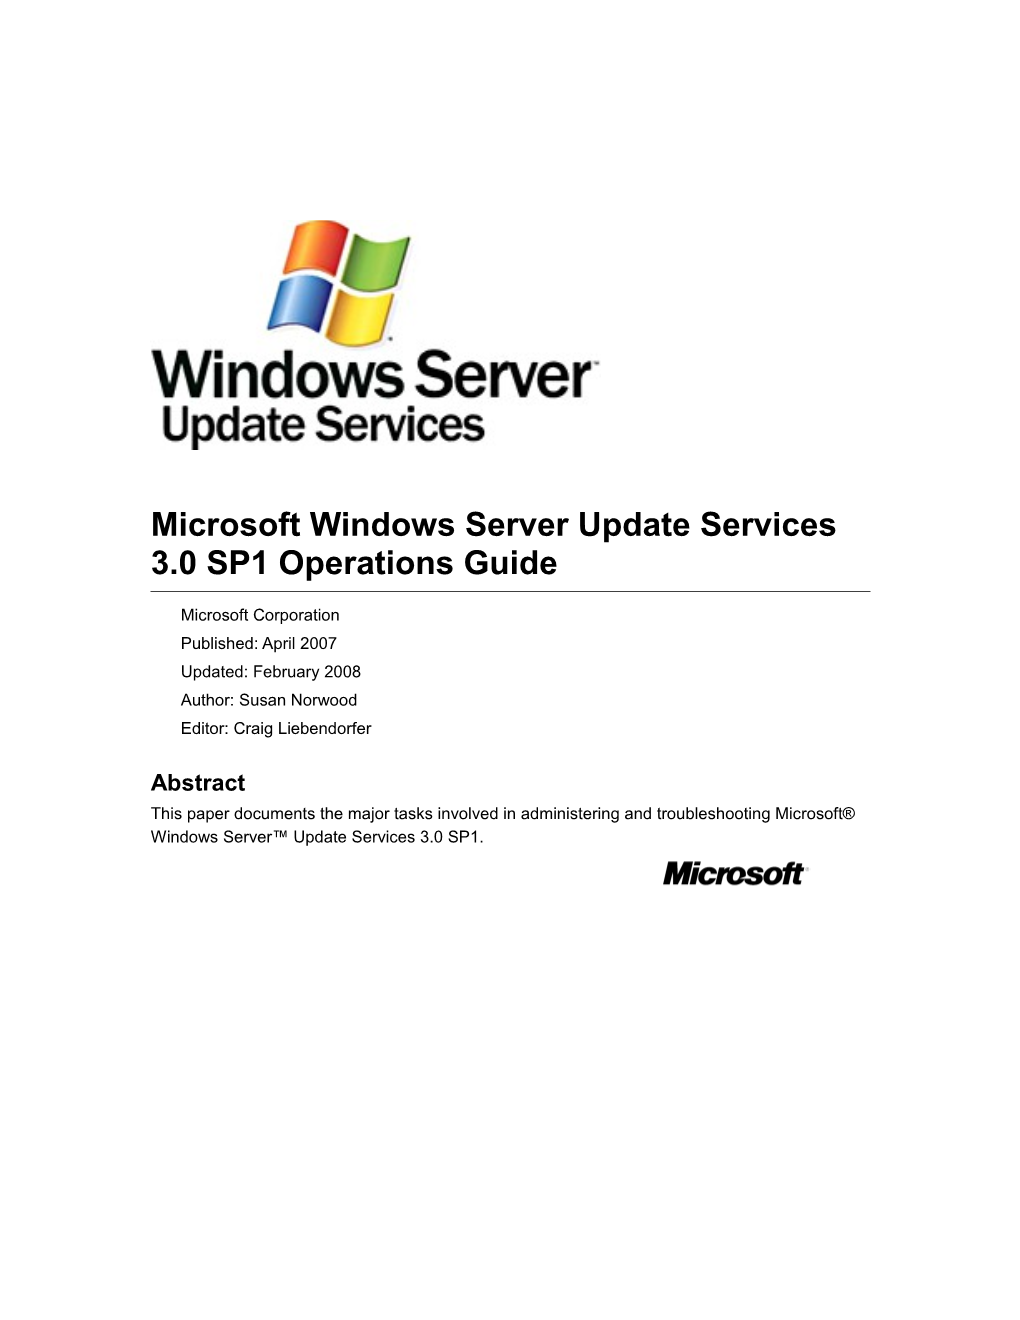 Microsoft Windows Server Update Services 3.0 SP1 Operations Guide